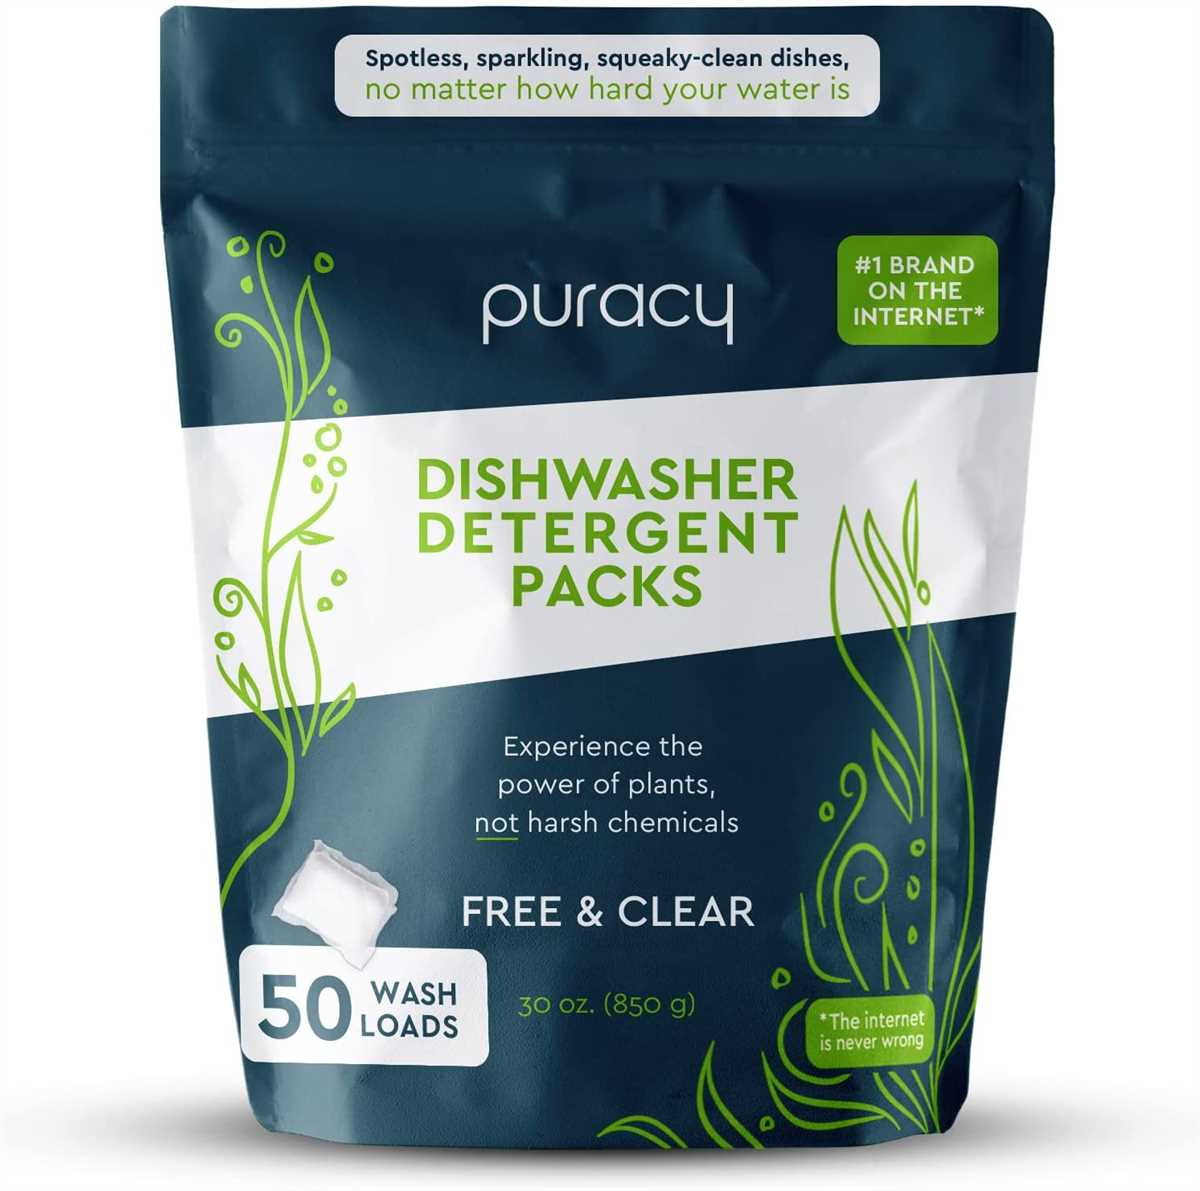 Review of fragrance free dishwasher detergents for spotless clean dishes